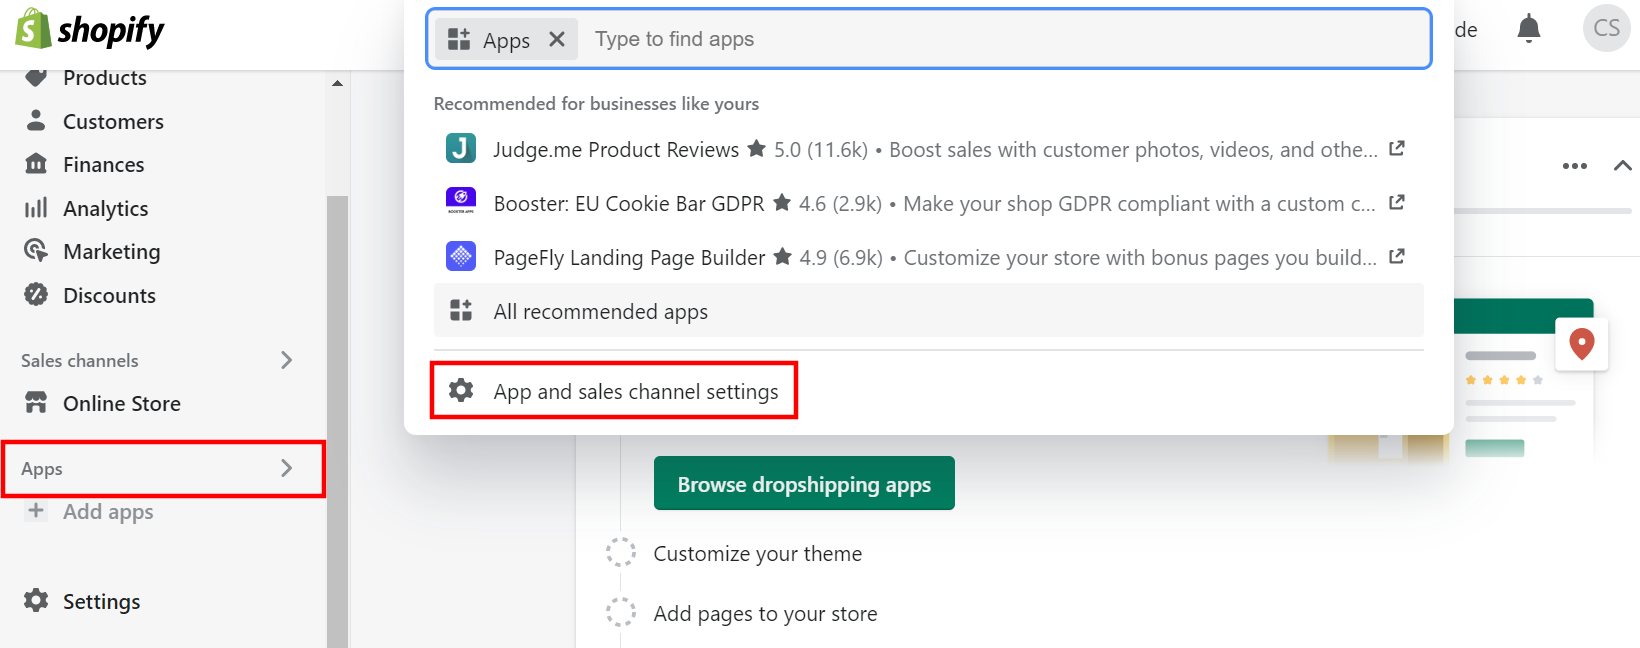 Shopify-Account-App_and_save_channel_settings.png